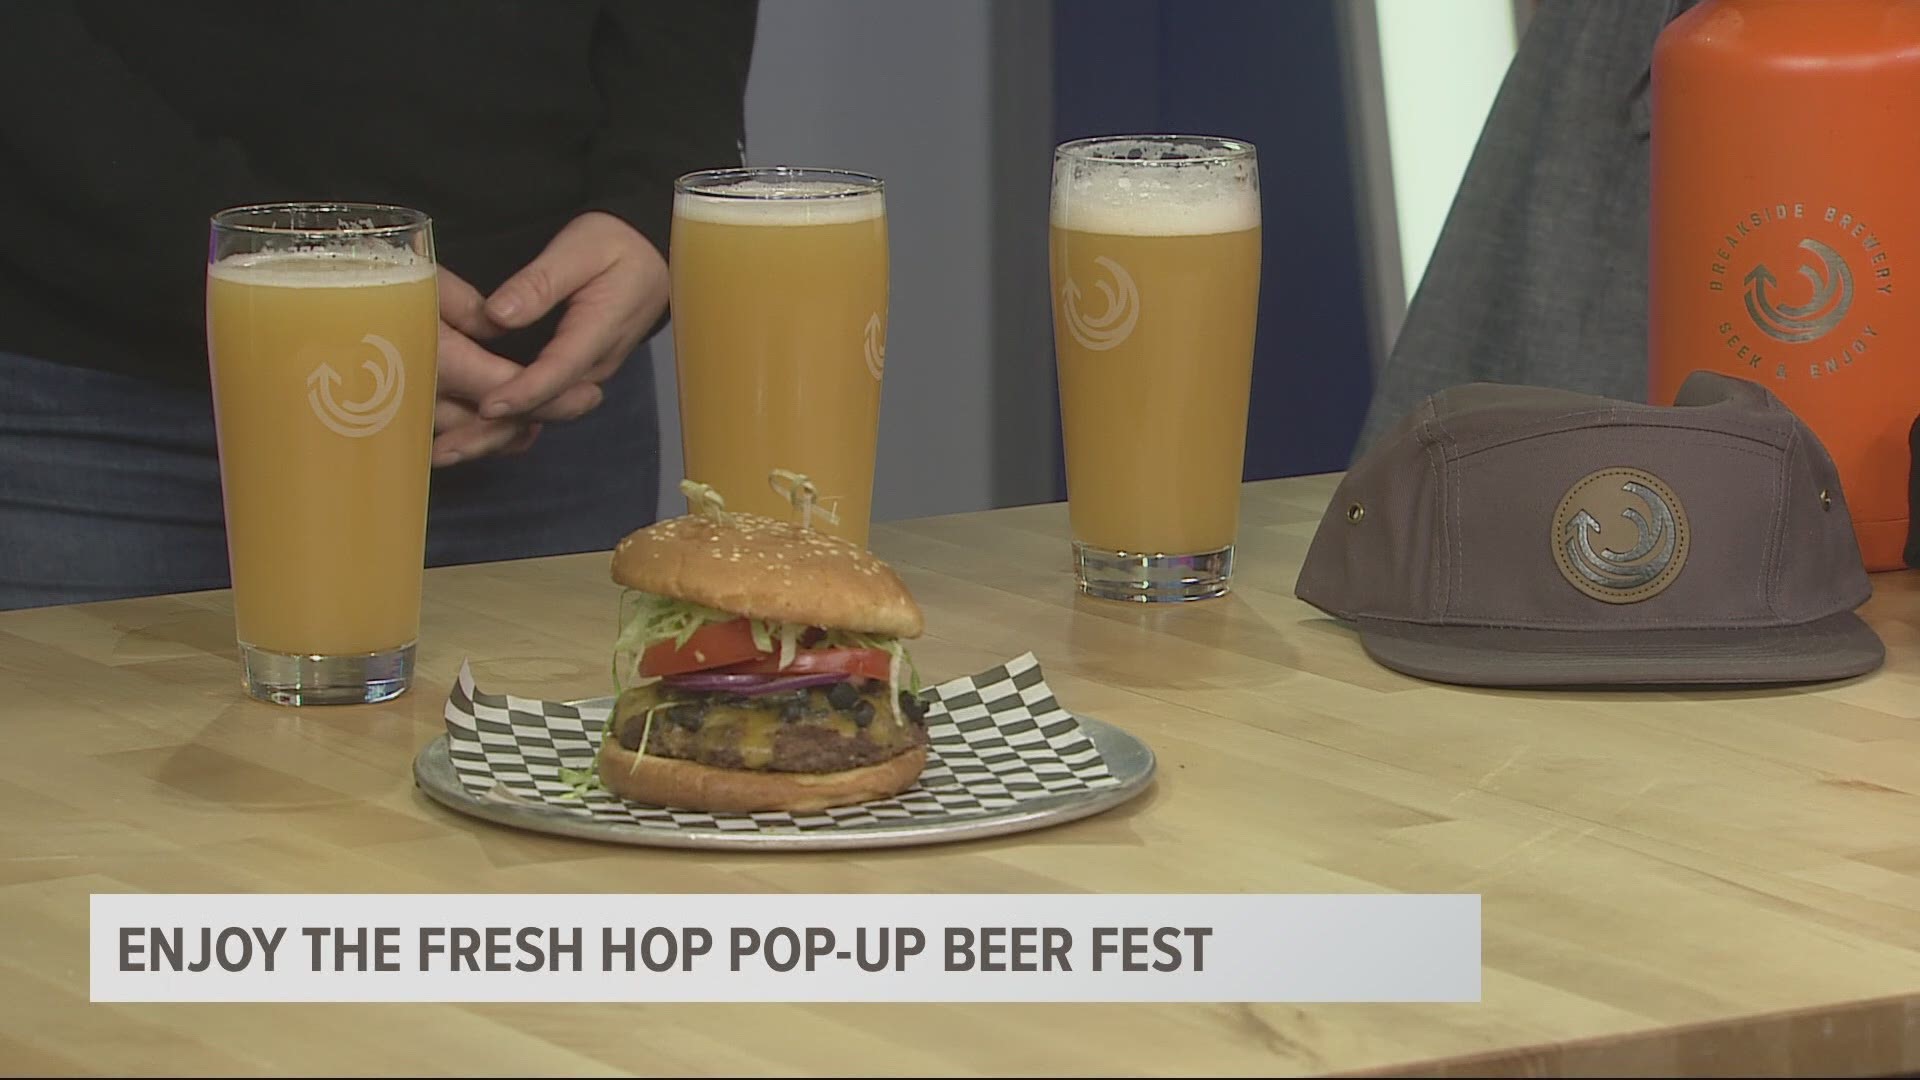 The Fresh Hop Pop-Up Beer Fest runs through Sept. 29th with a different brewery every day.
fresh-hops.com
#TonightwithCassidy